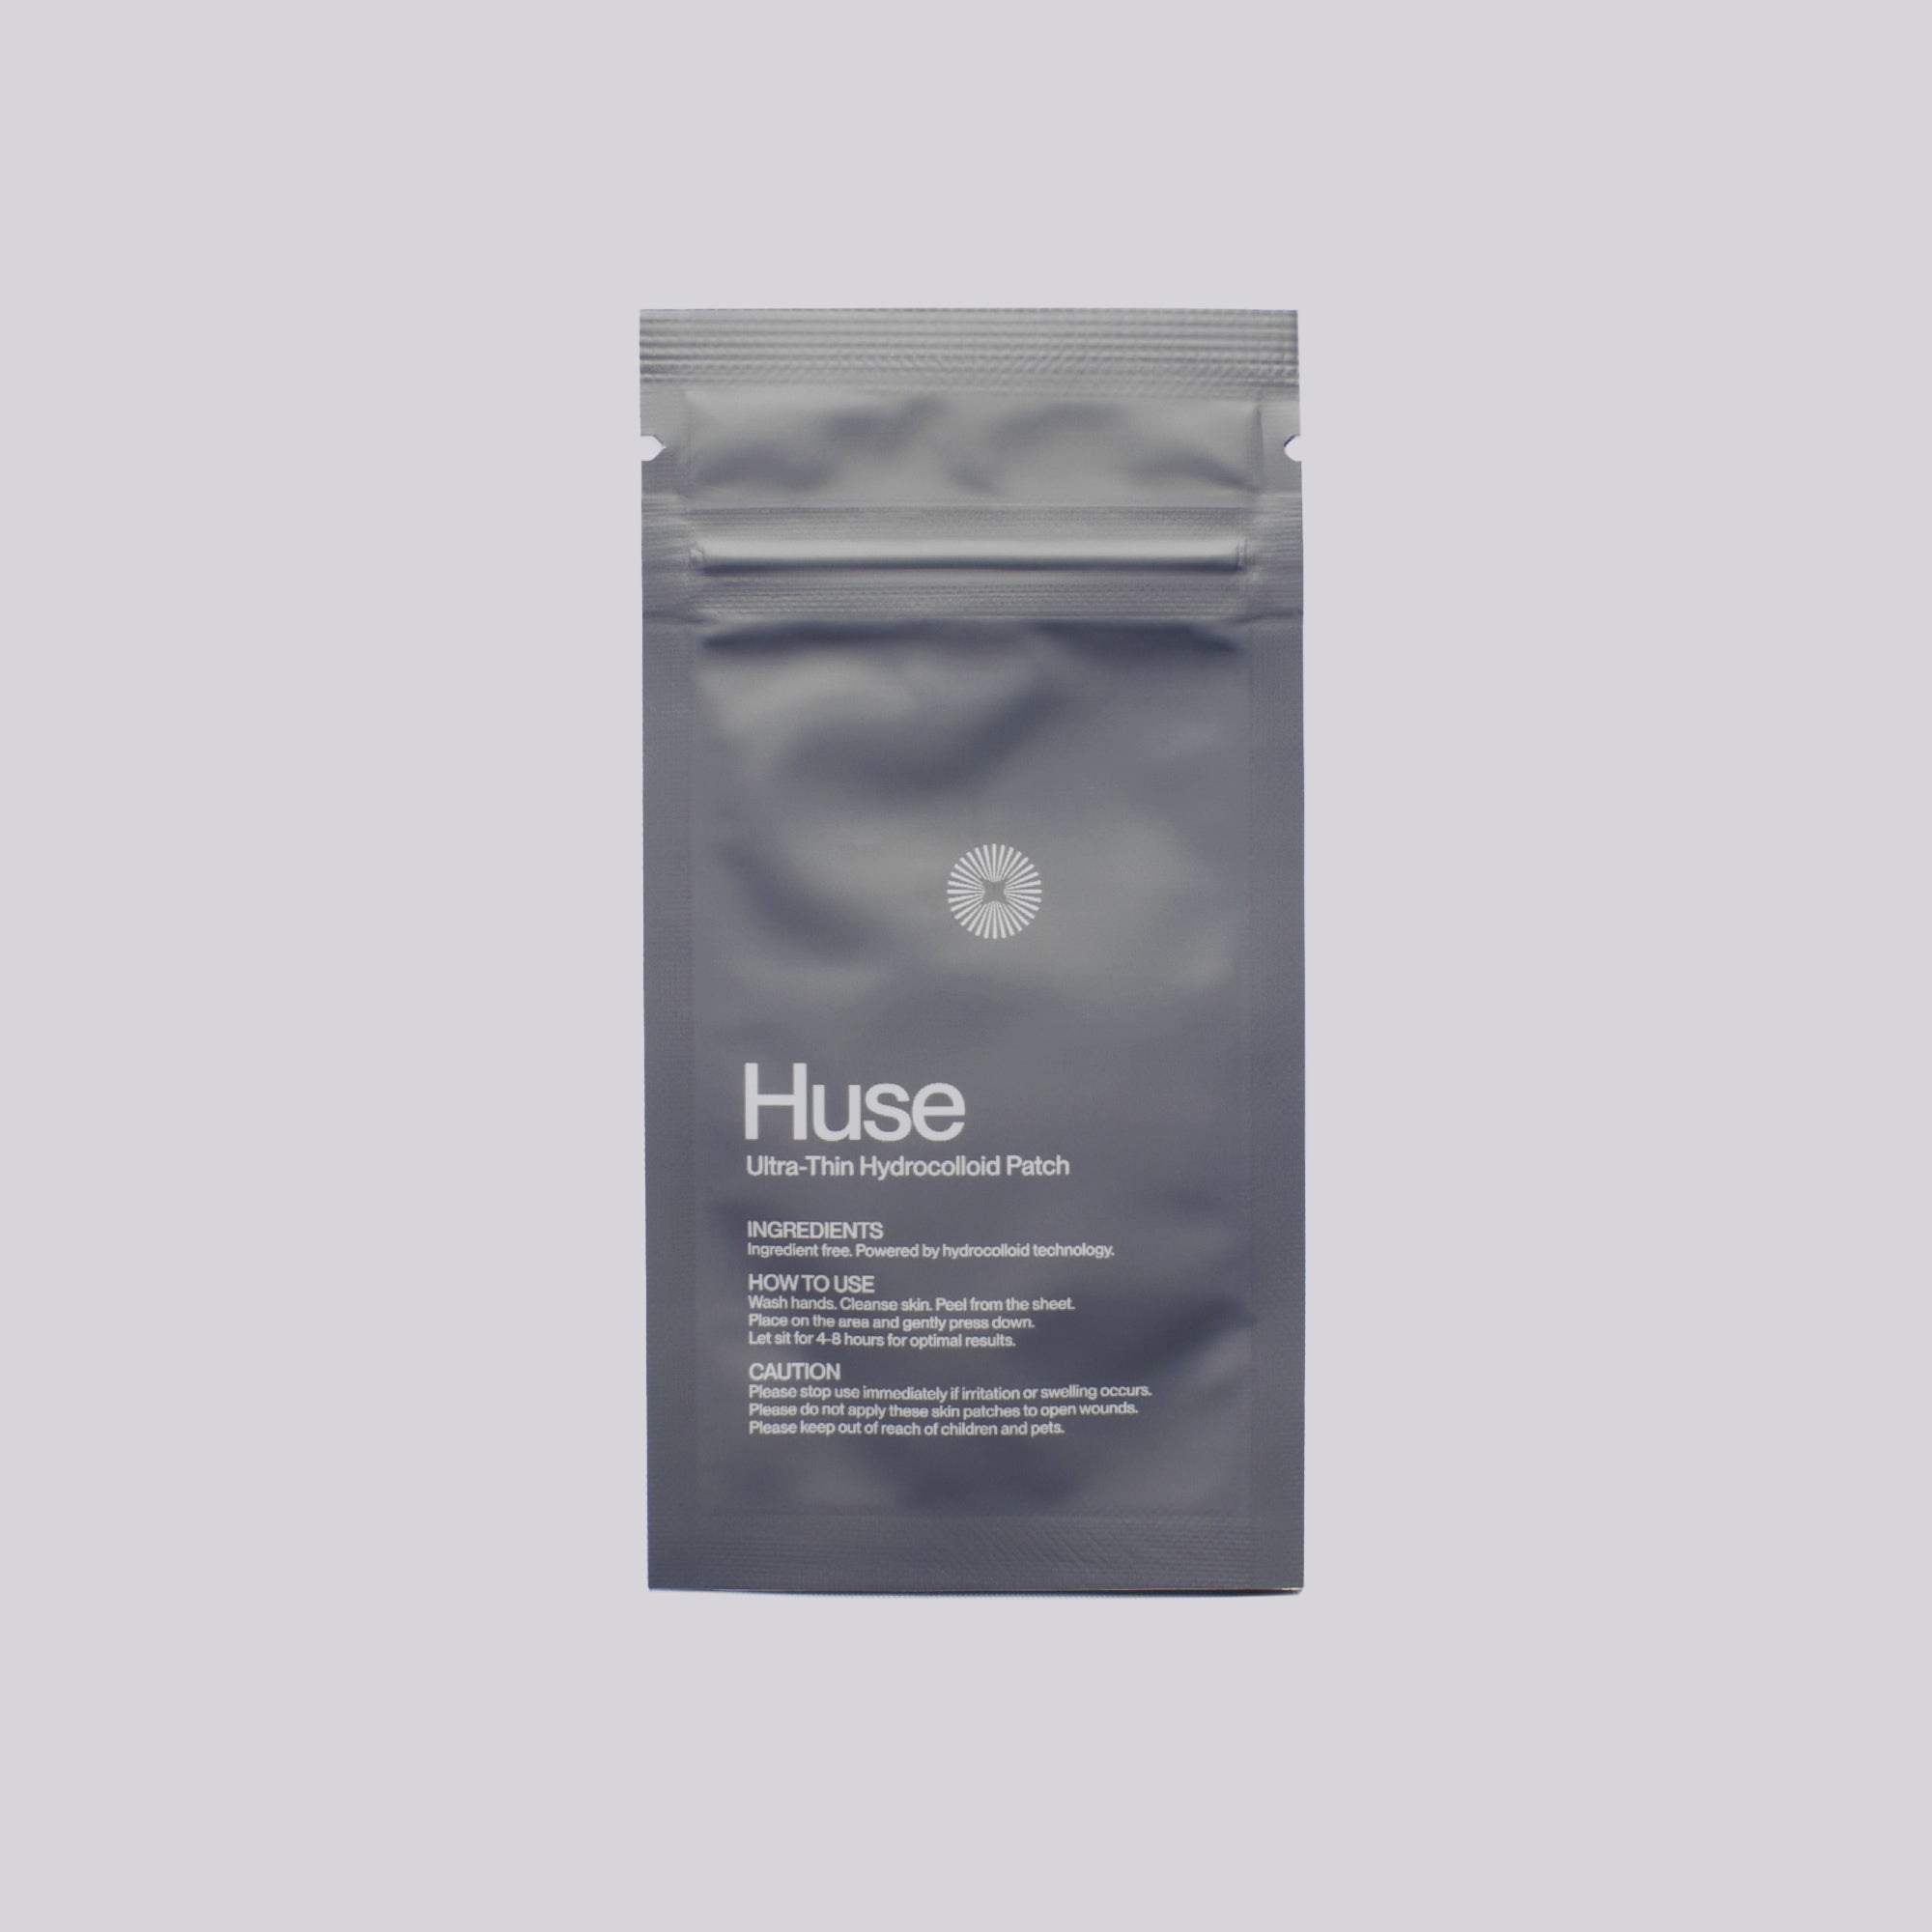 Huse Invisi Patch harnesses hydrocolloid technology, creating an optimal and moisture-rich environment for fast healing and protection. Best for acne-prone skin and day wear.